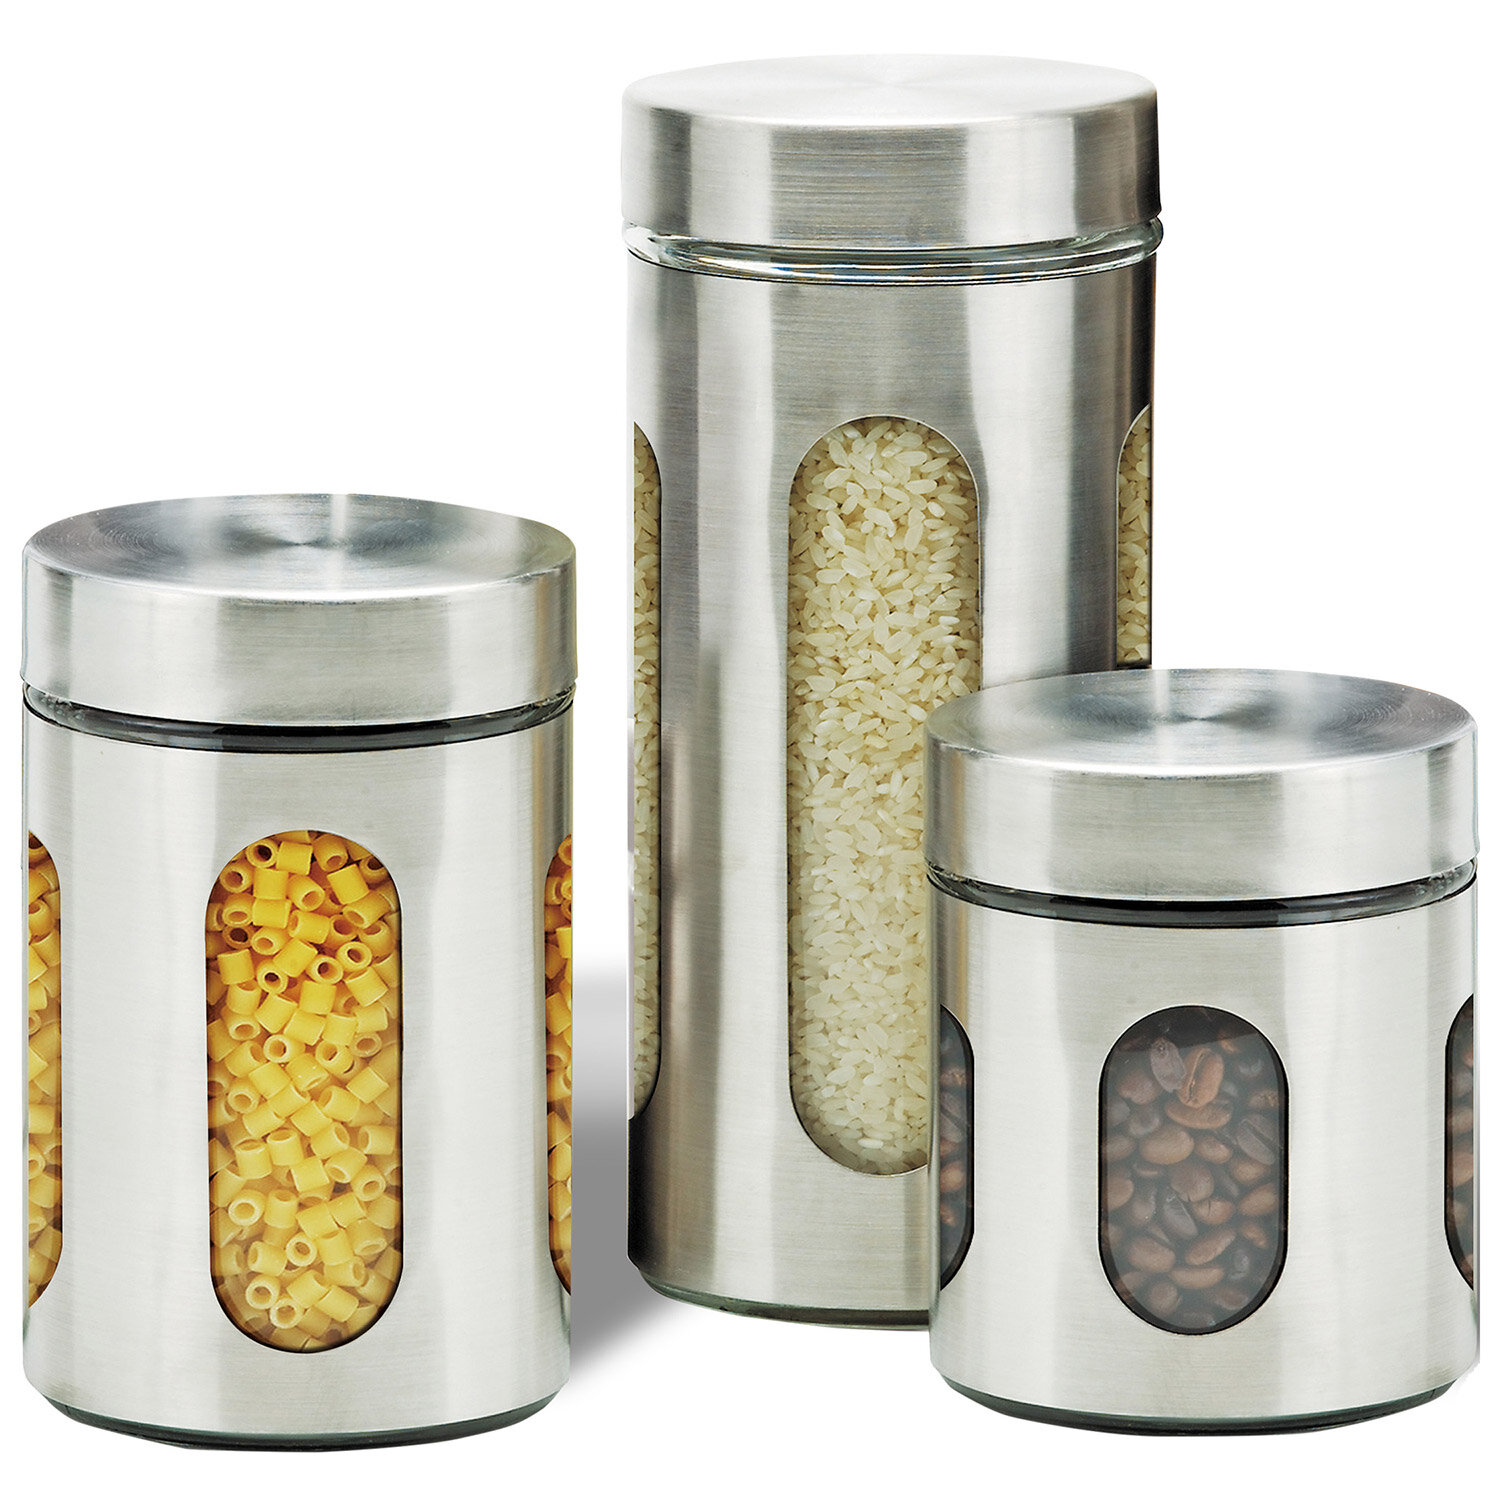 17 Stories Kitchen Canisters With Bamboo Lids, Airtight Metal